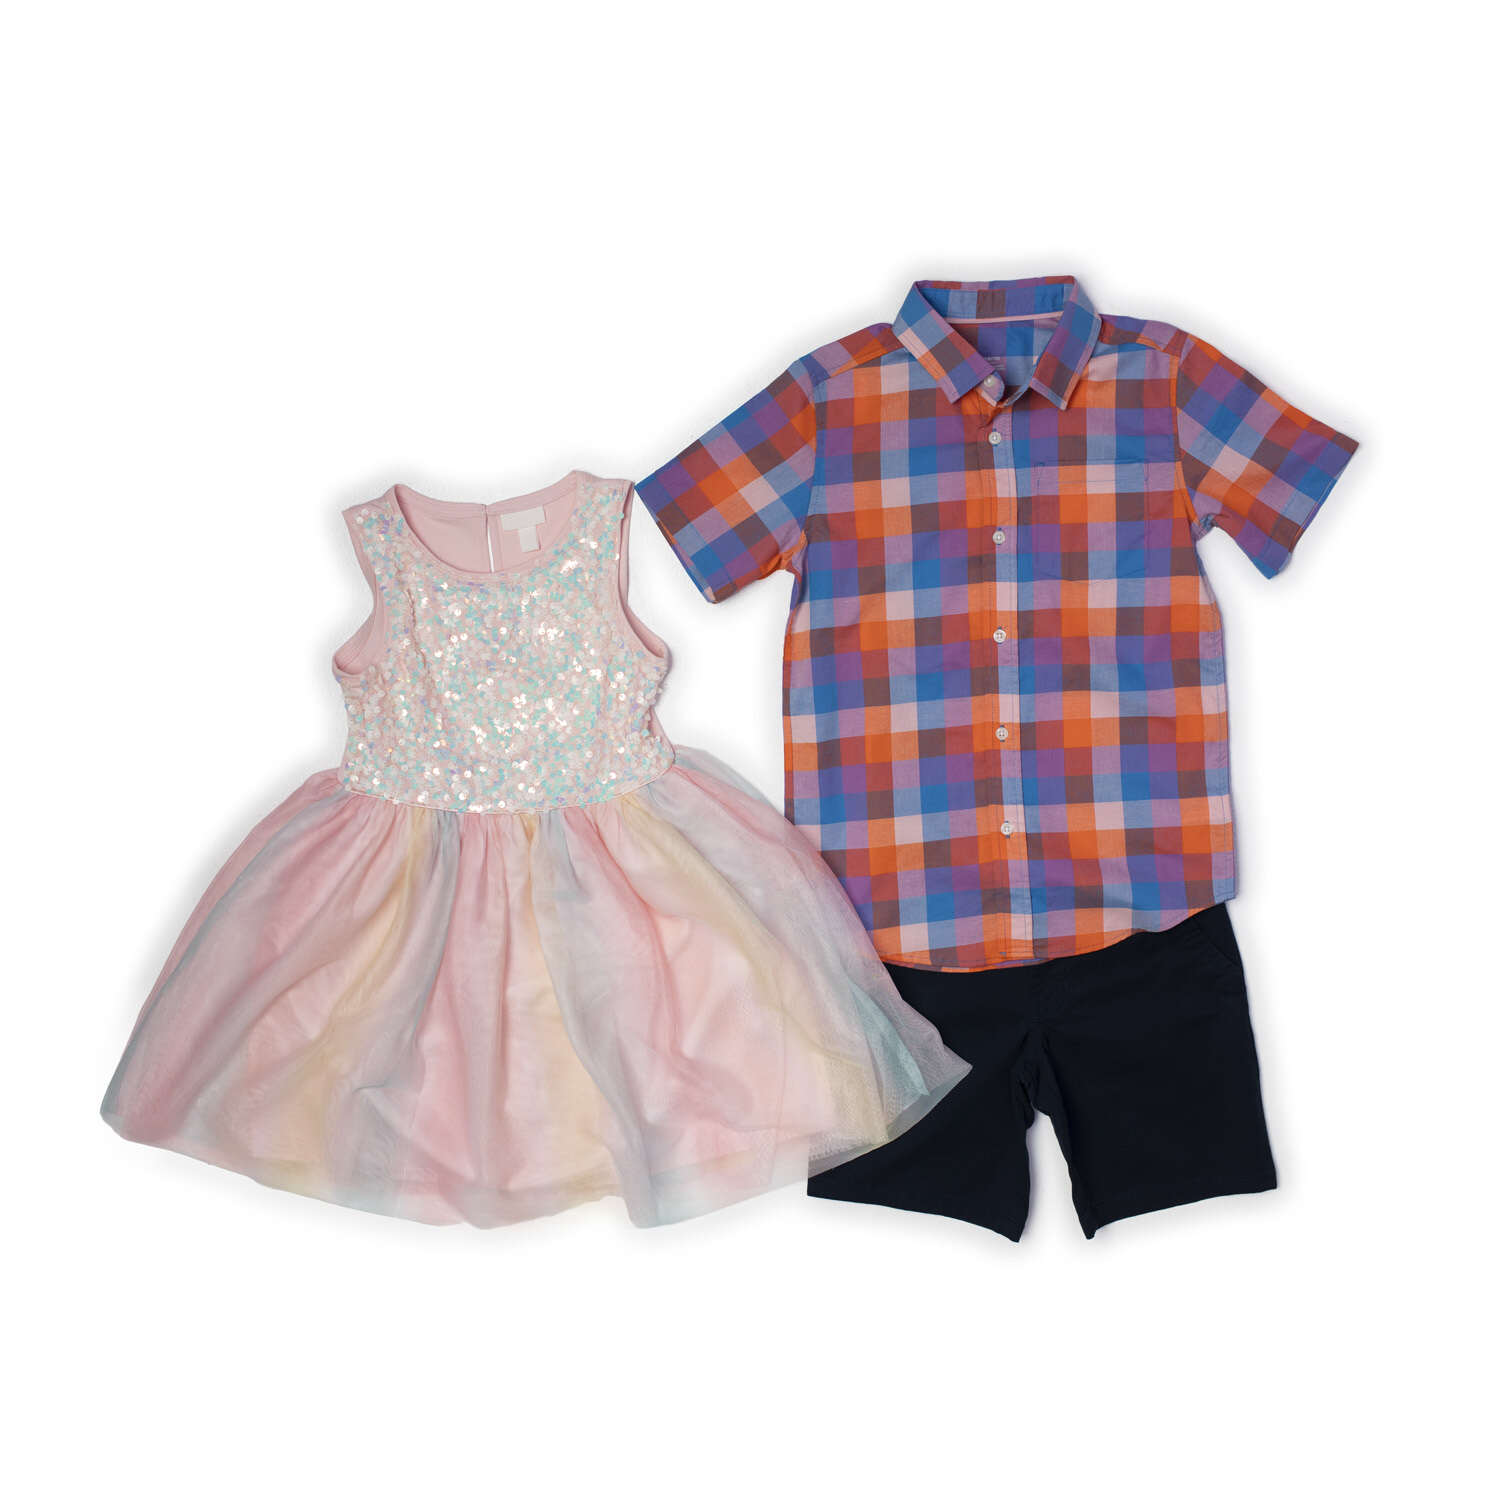 Buy & Sell Gently Used Kids' Clothes, Shoes, Toys, and Baby Gear